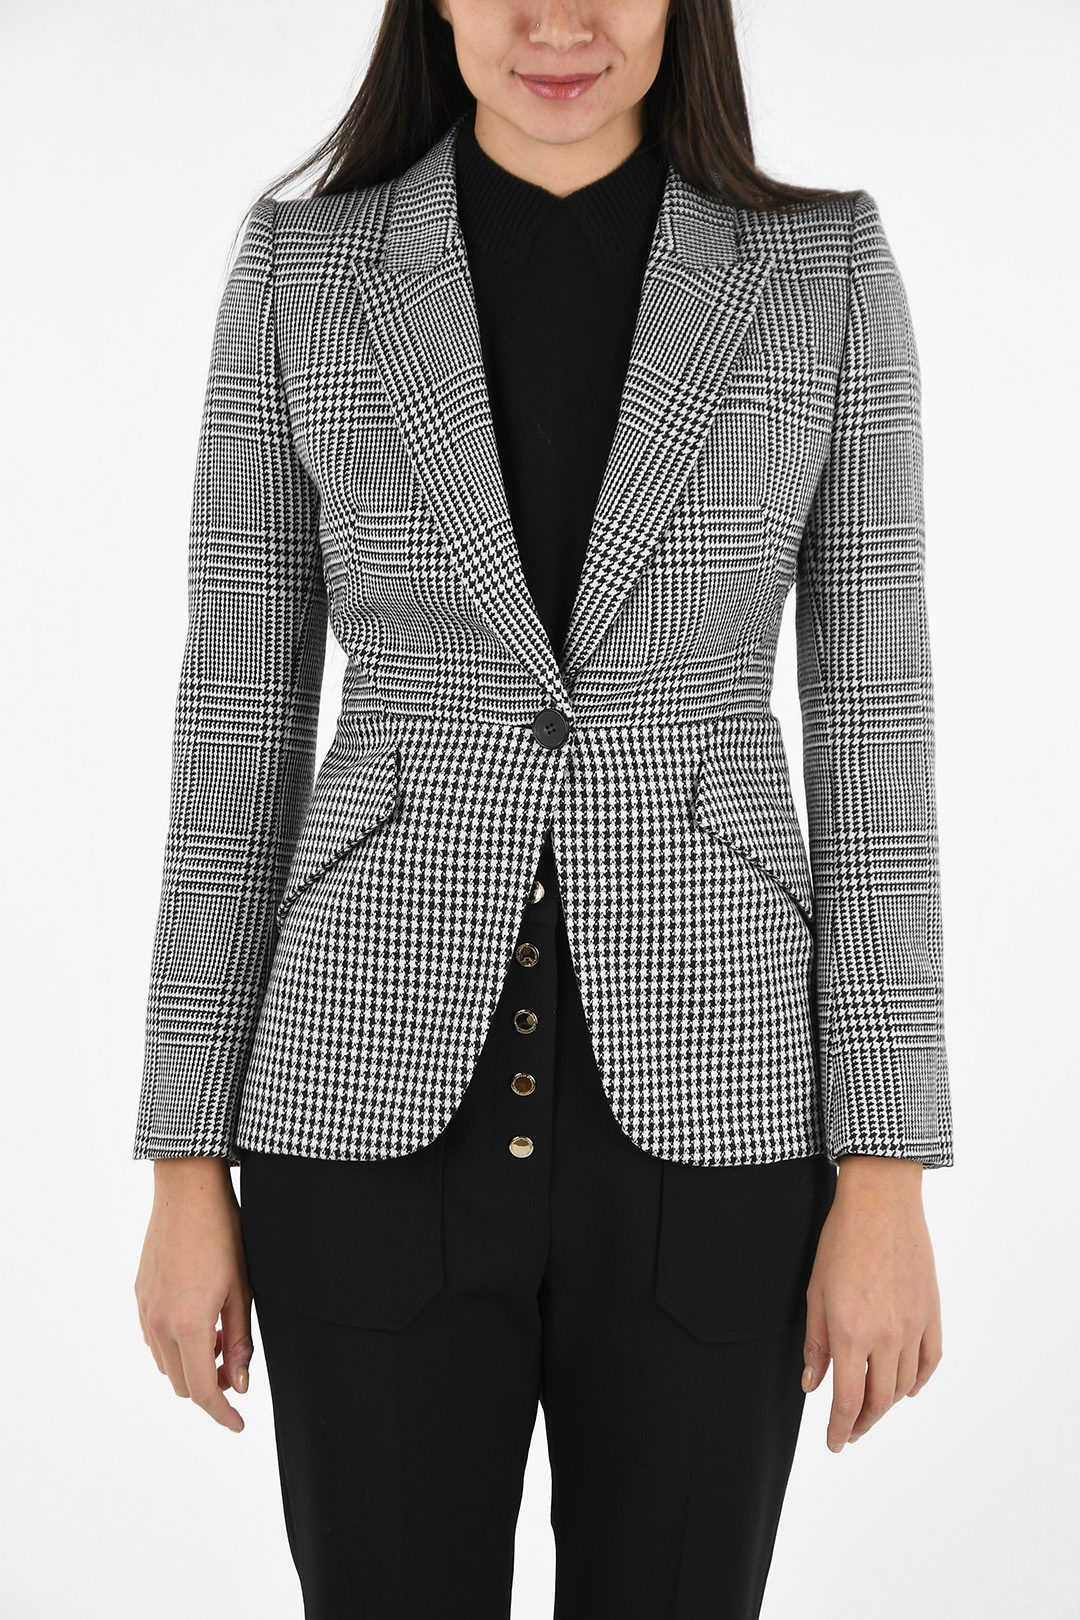 Alexander McQueen Houndstooth Single Breasted Blazer women - Glamood Outlet